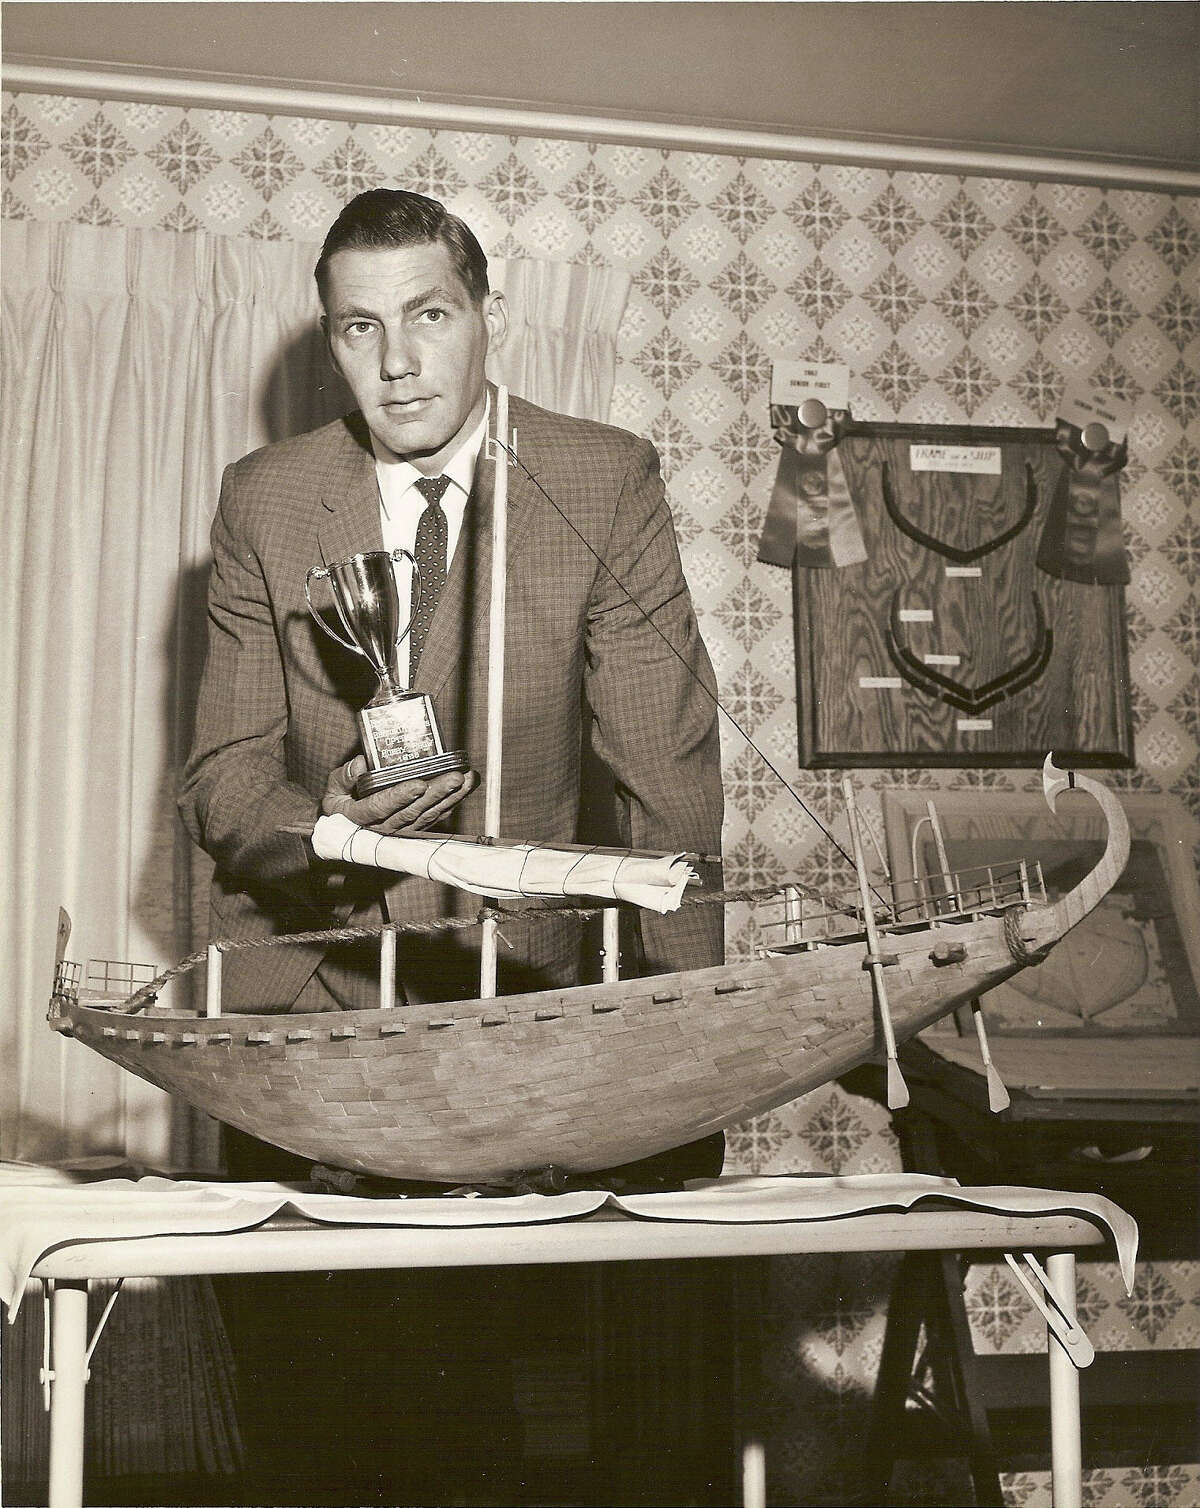 In 1963, J. Richard Steffy's model of an Egyptian ship won Best of Show in a county hobby fair in Pennsylvania. Many of his later models were destroyed as part of his research. (Photo courtesy of the Reading Eagle)